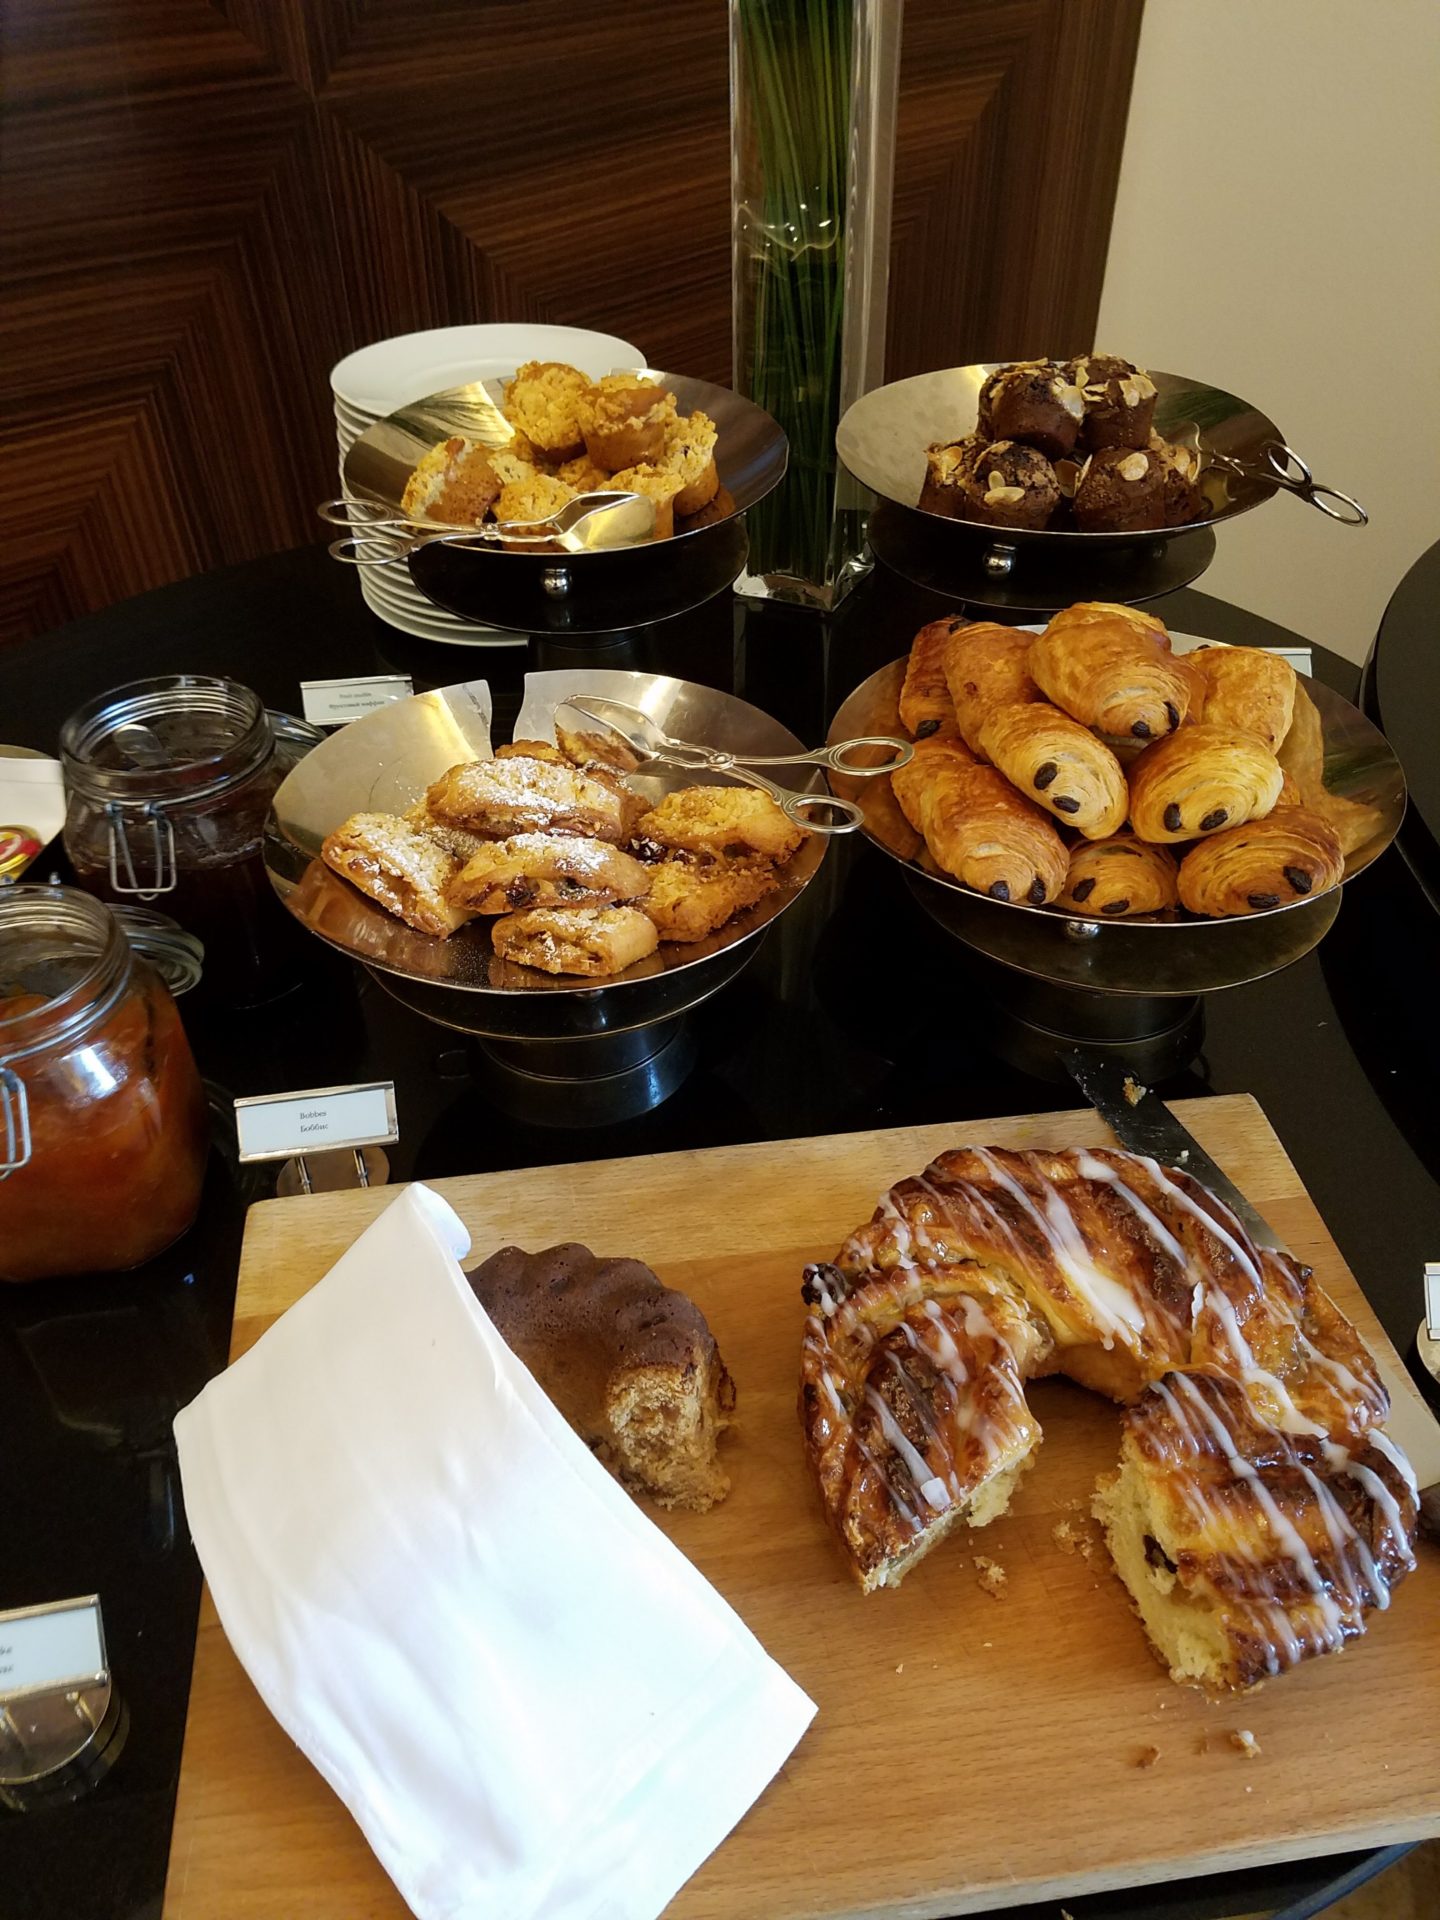 a table with plates of pastries and pastries